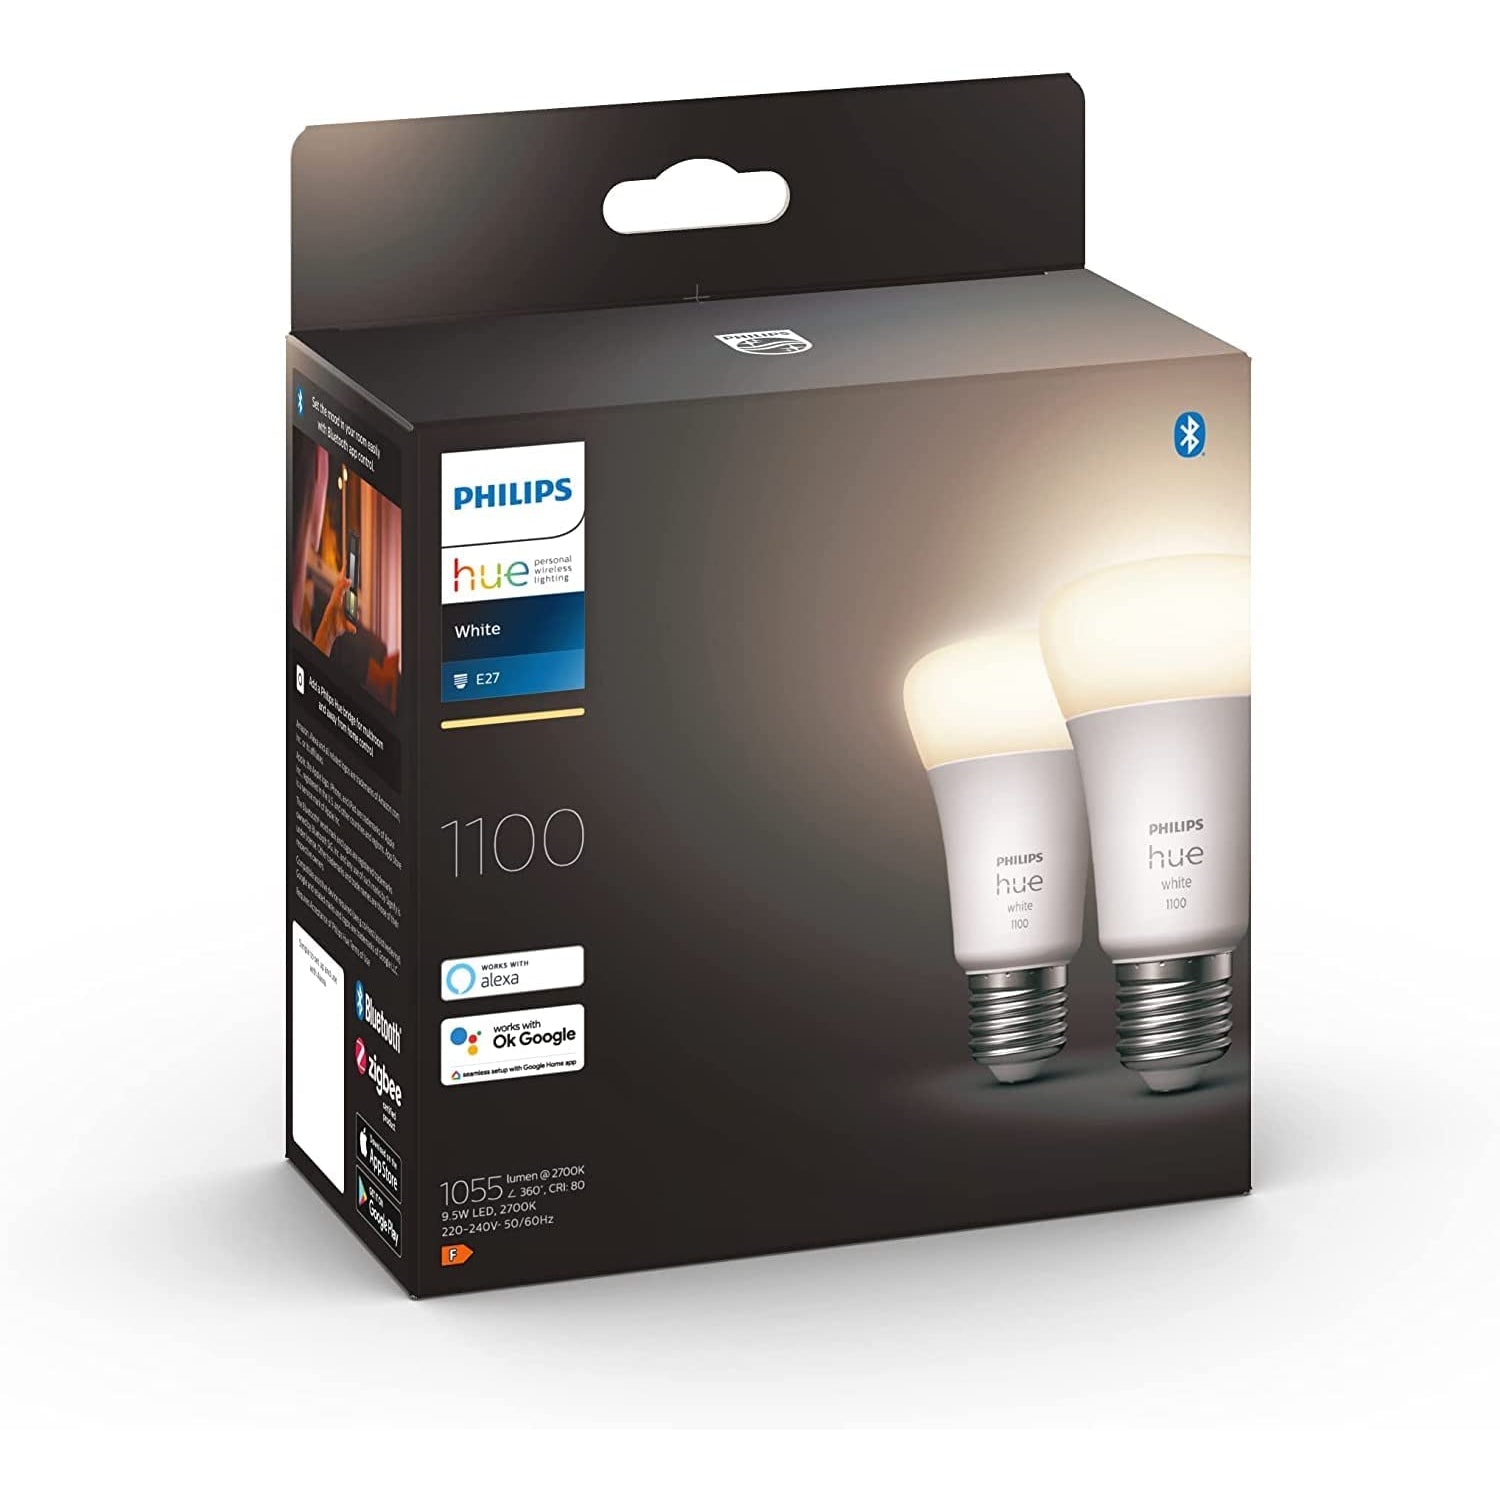 Philips Hue E27 White Smart Bulb With Bluetooth - 2 Pack - New